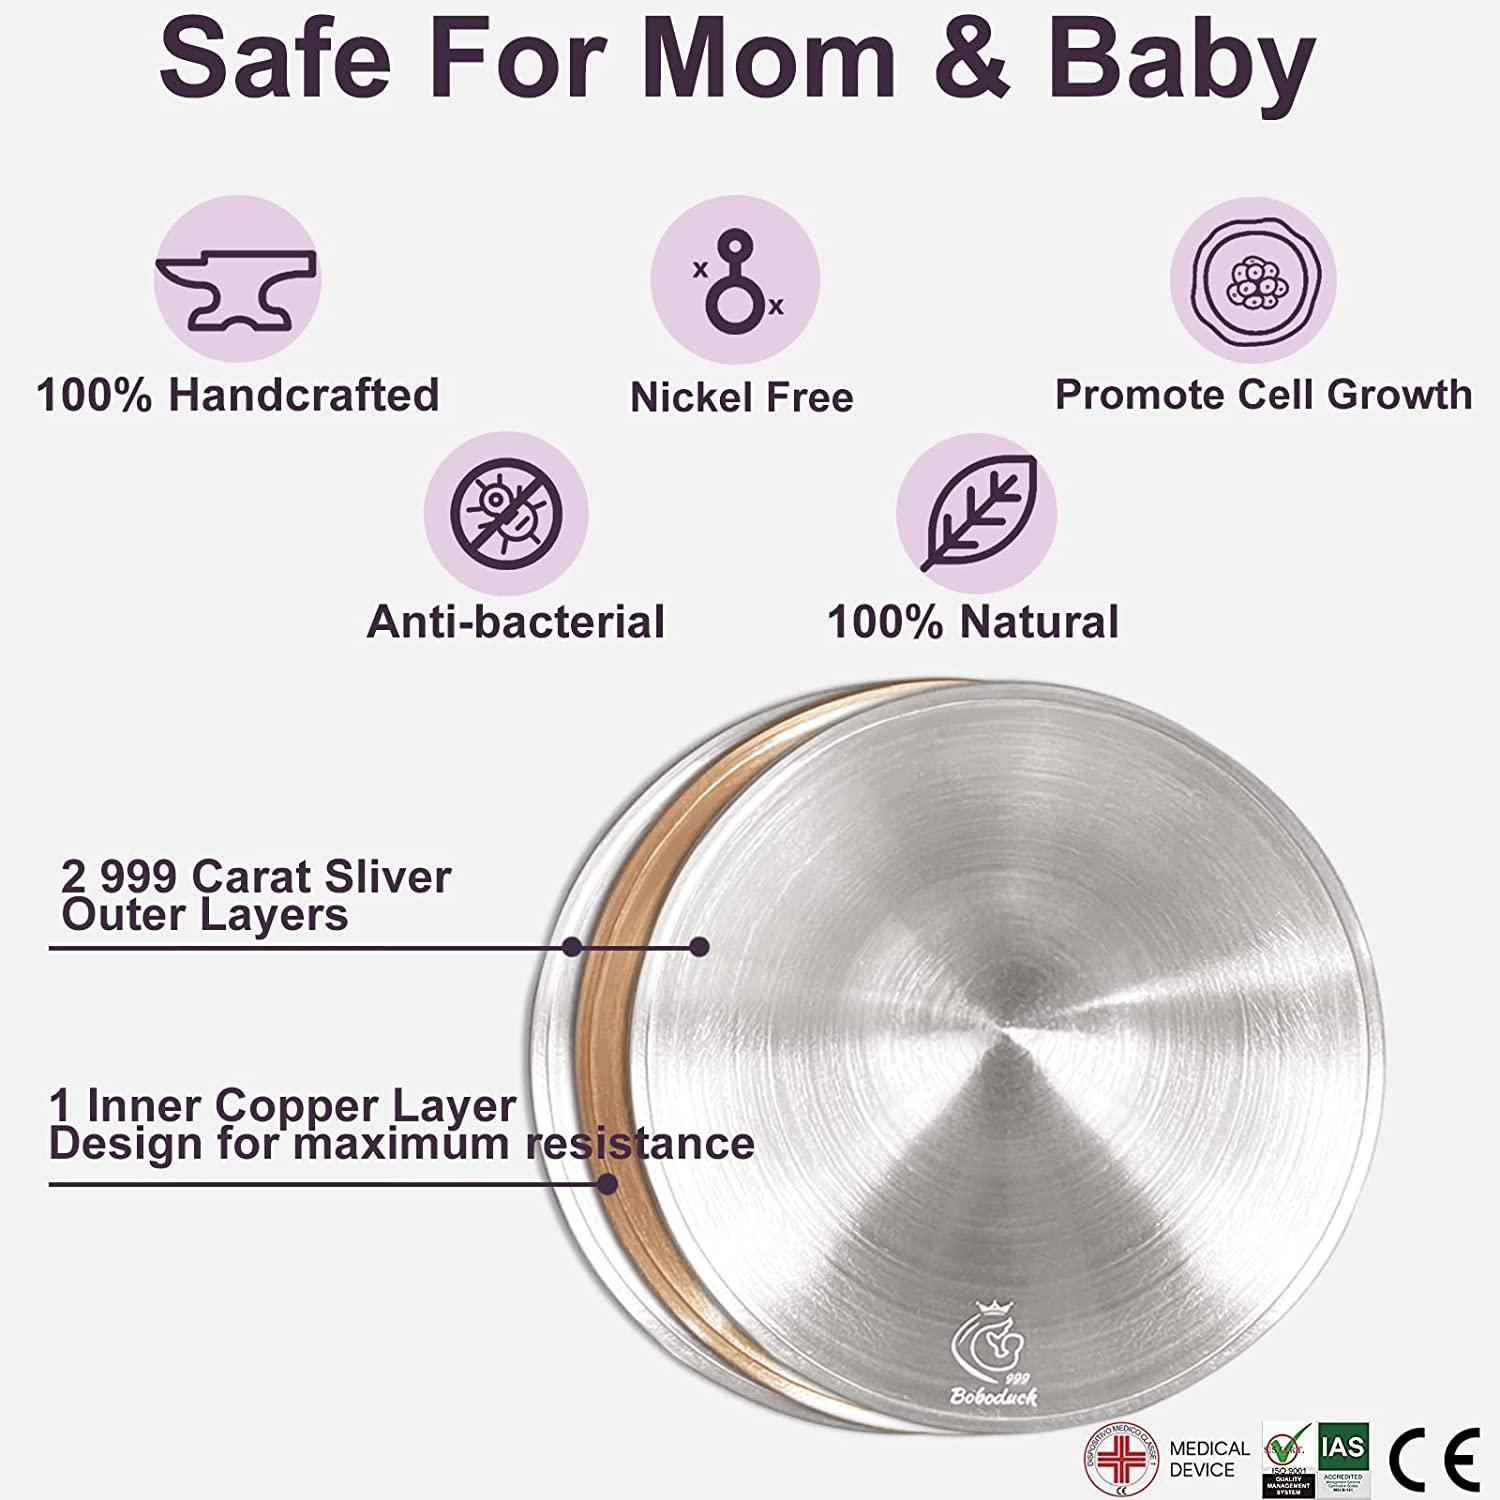 Nipple Shields – To Use or Not To Use? — Healthy Babies, Happy Moms Inc.